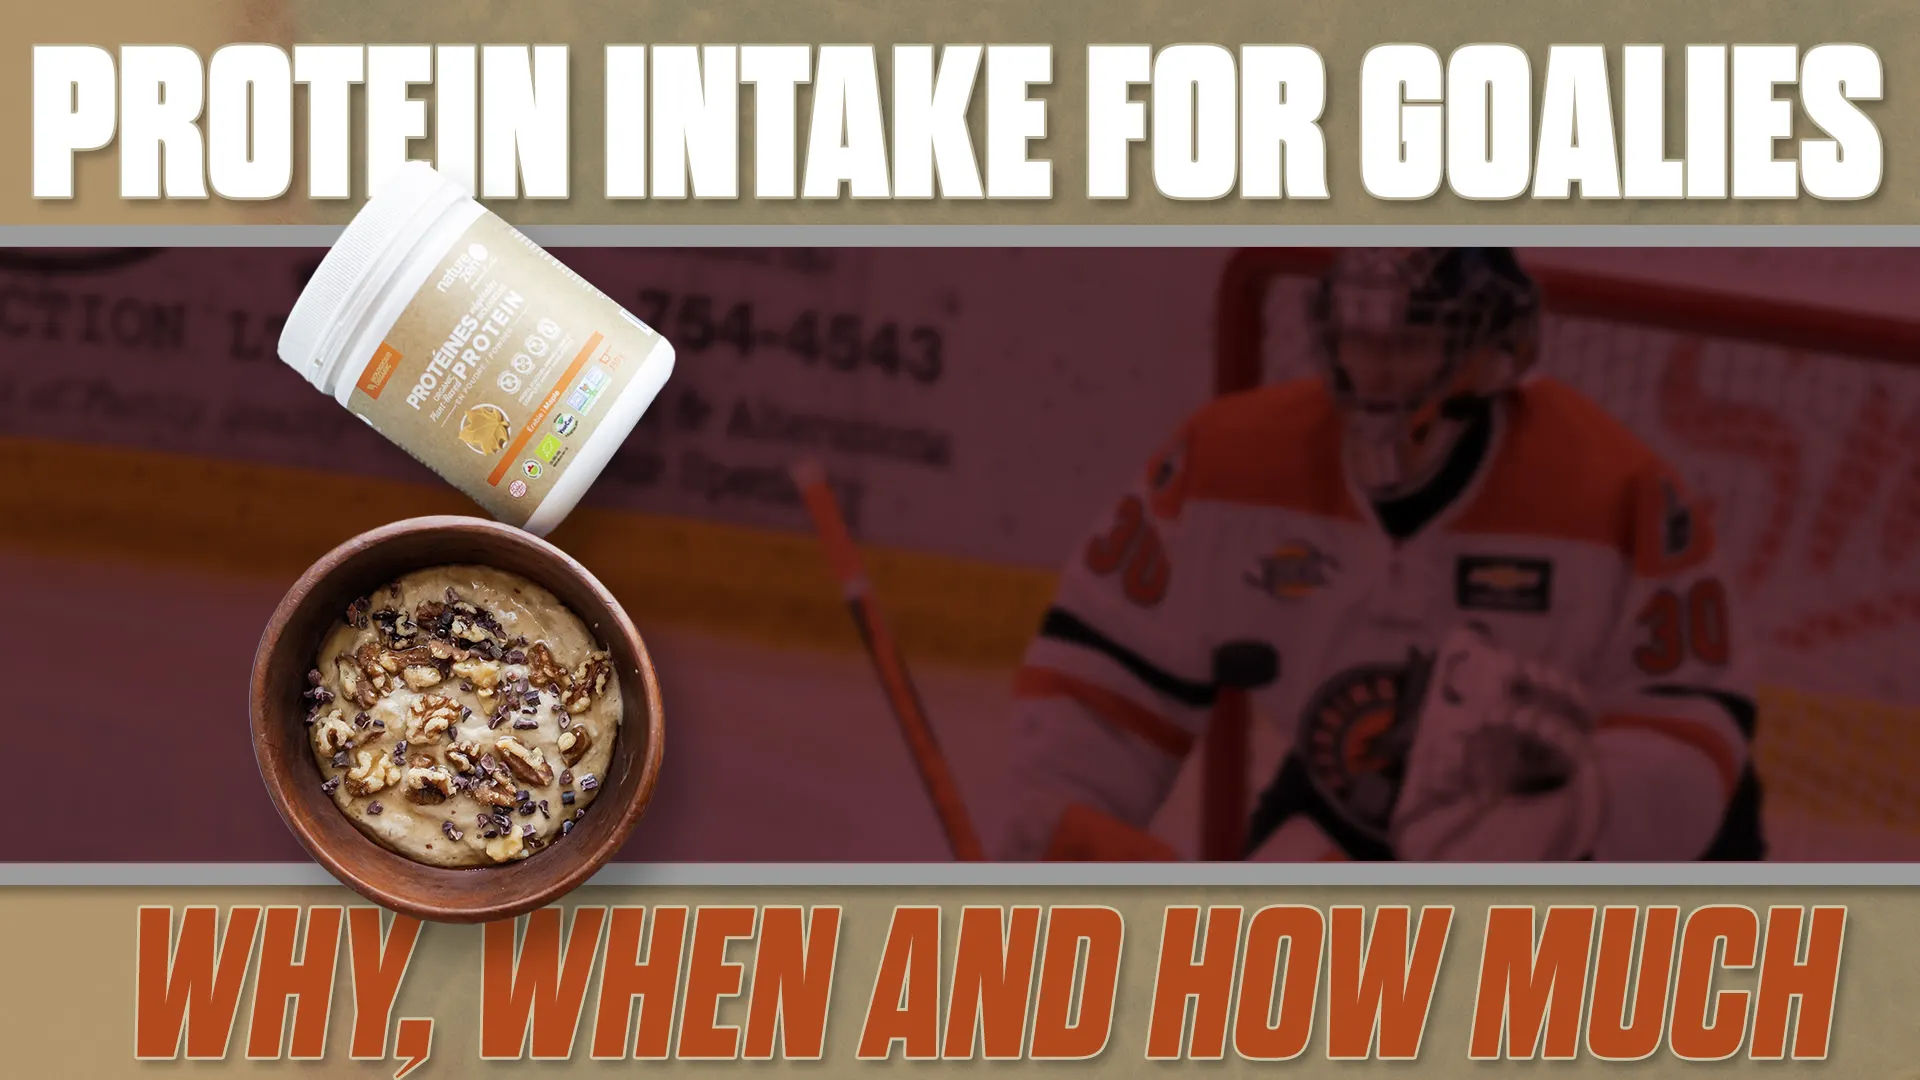 Protein Intake for Goalies: Why, When and How Much